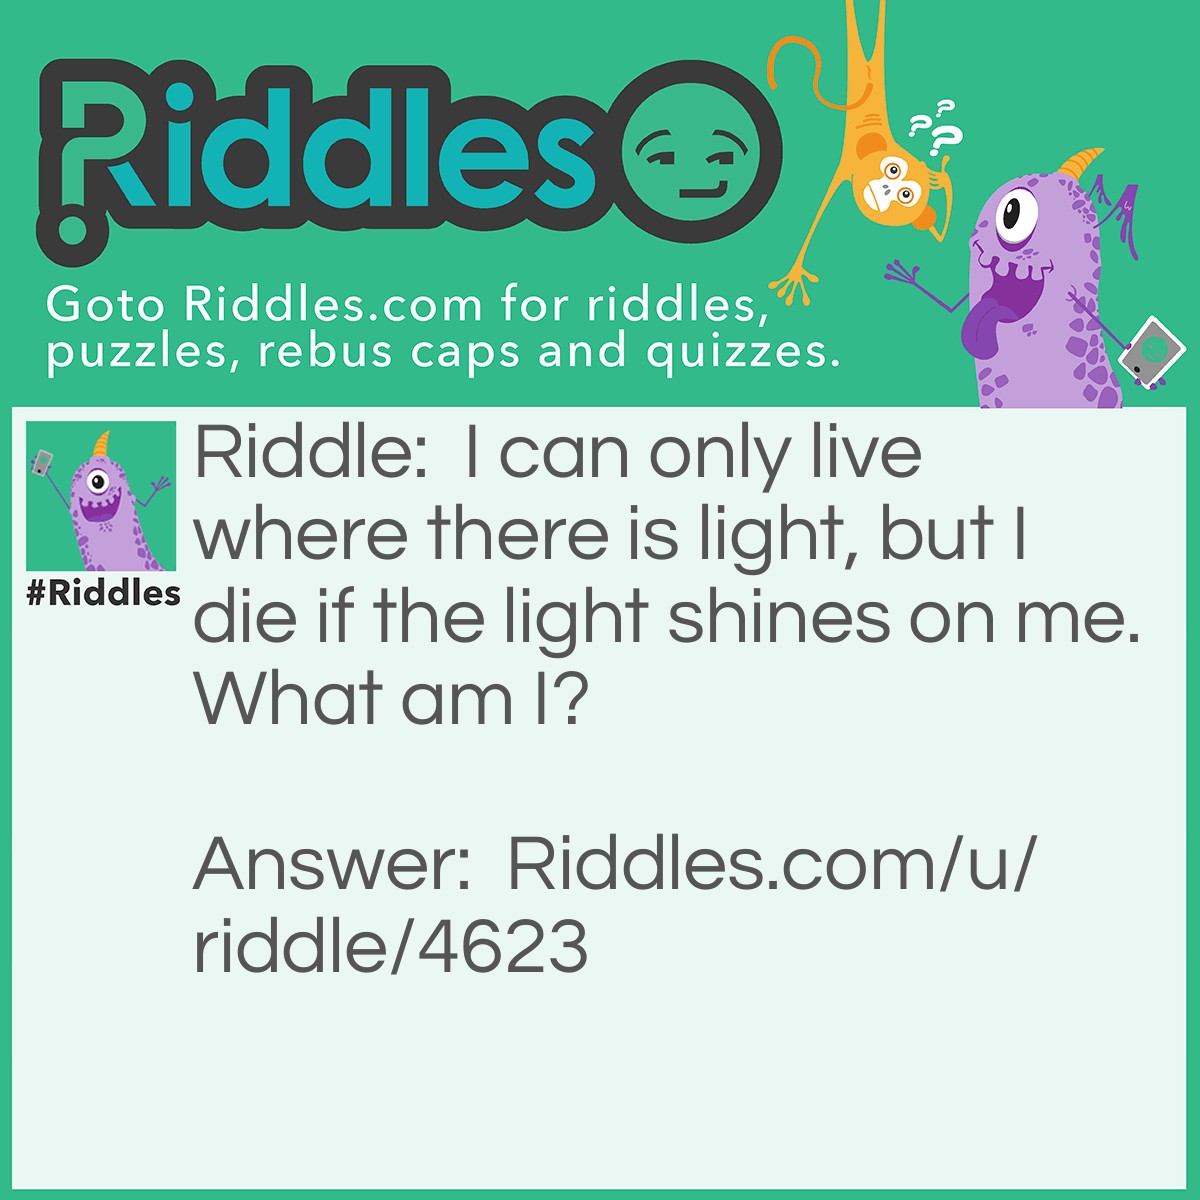 Riddle: I can only live where there is light, but I die if the light shines on me. What am I? Answer: A shadow.